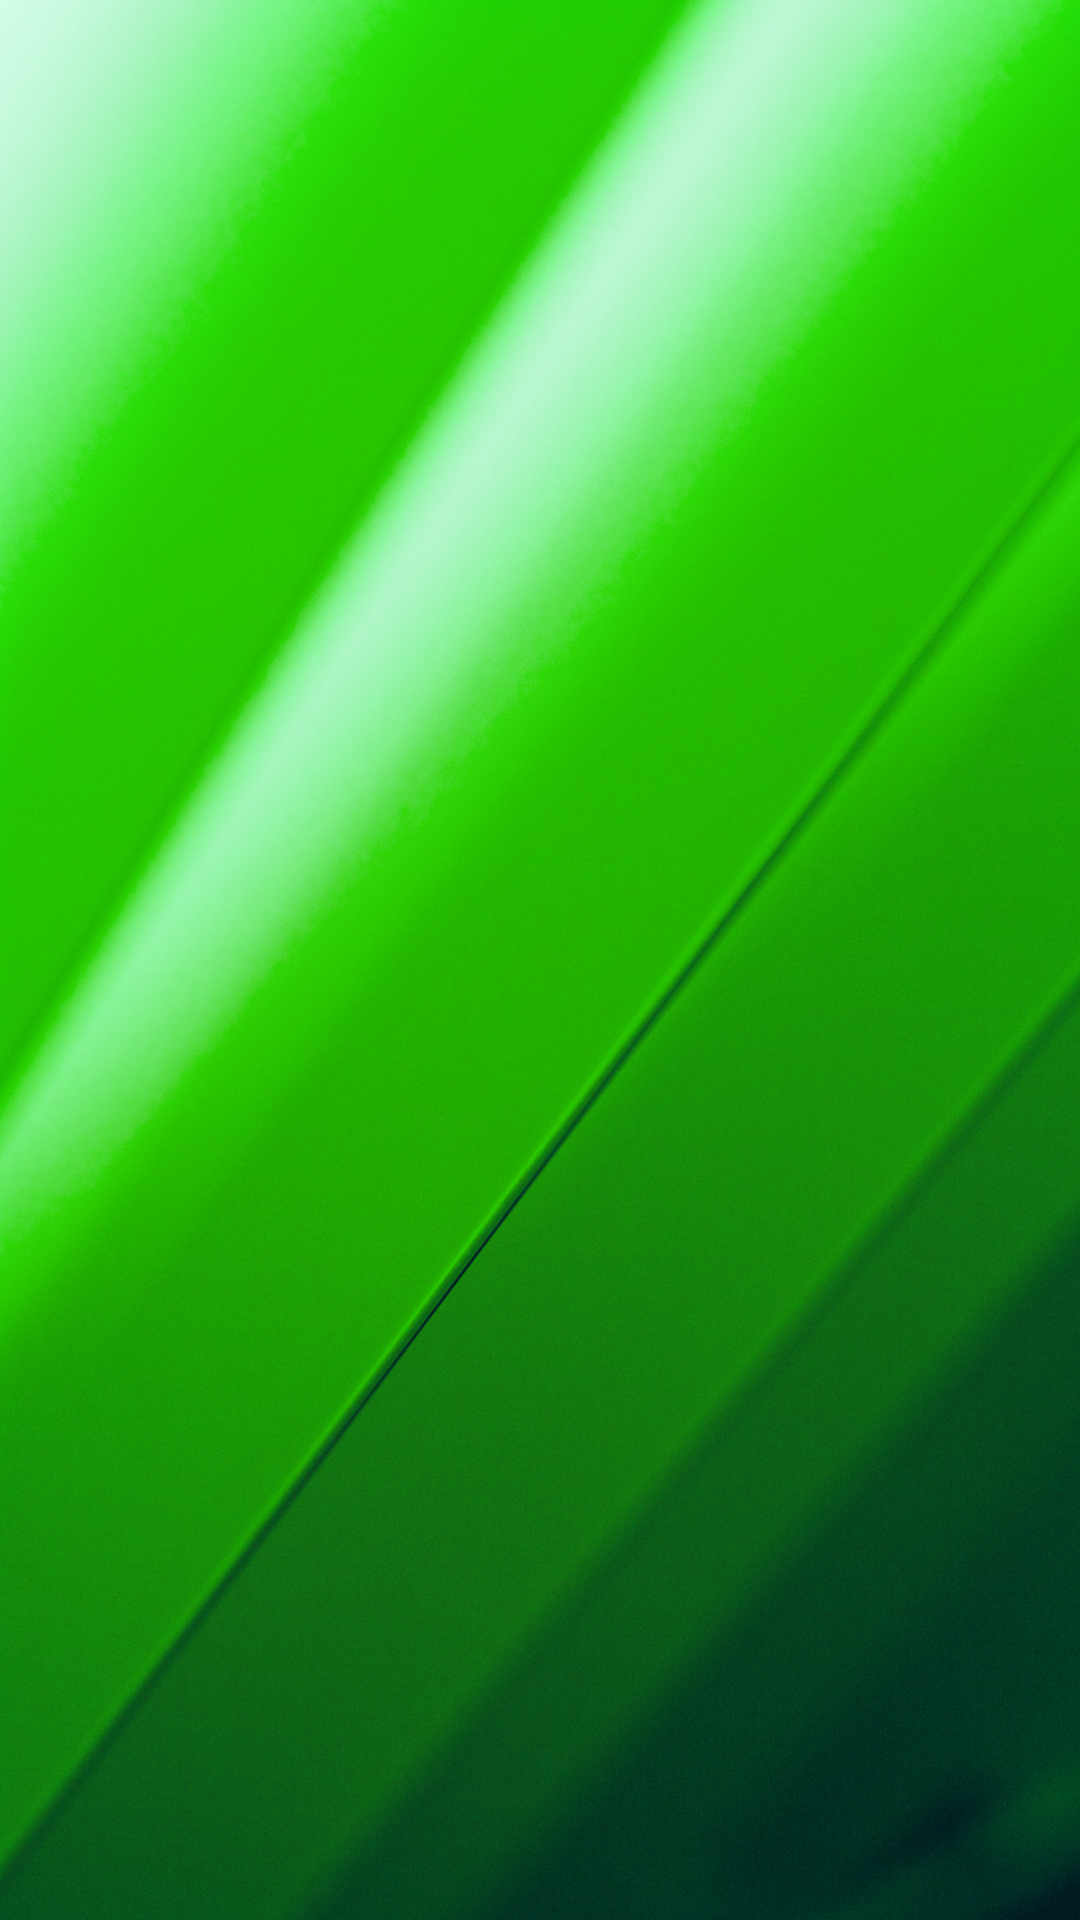 Free download Wallpaper a Simple green android wallpaper